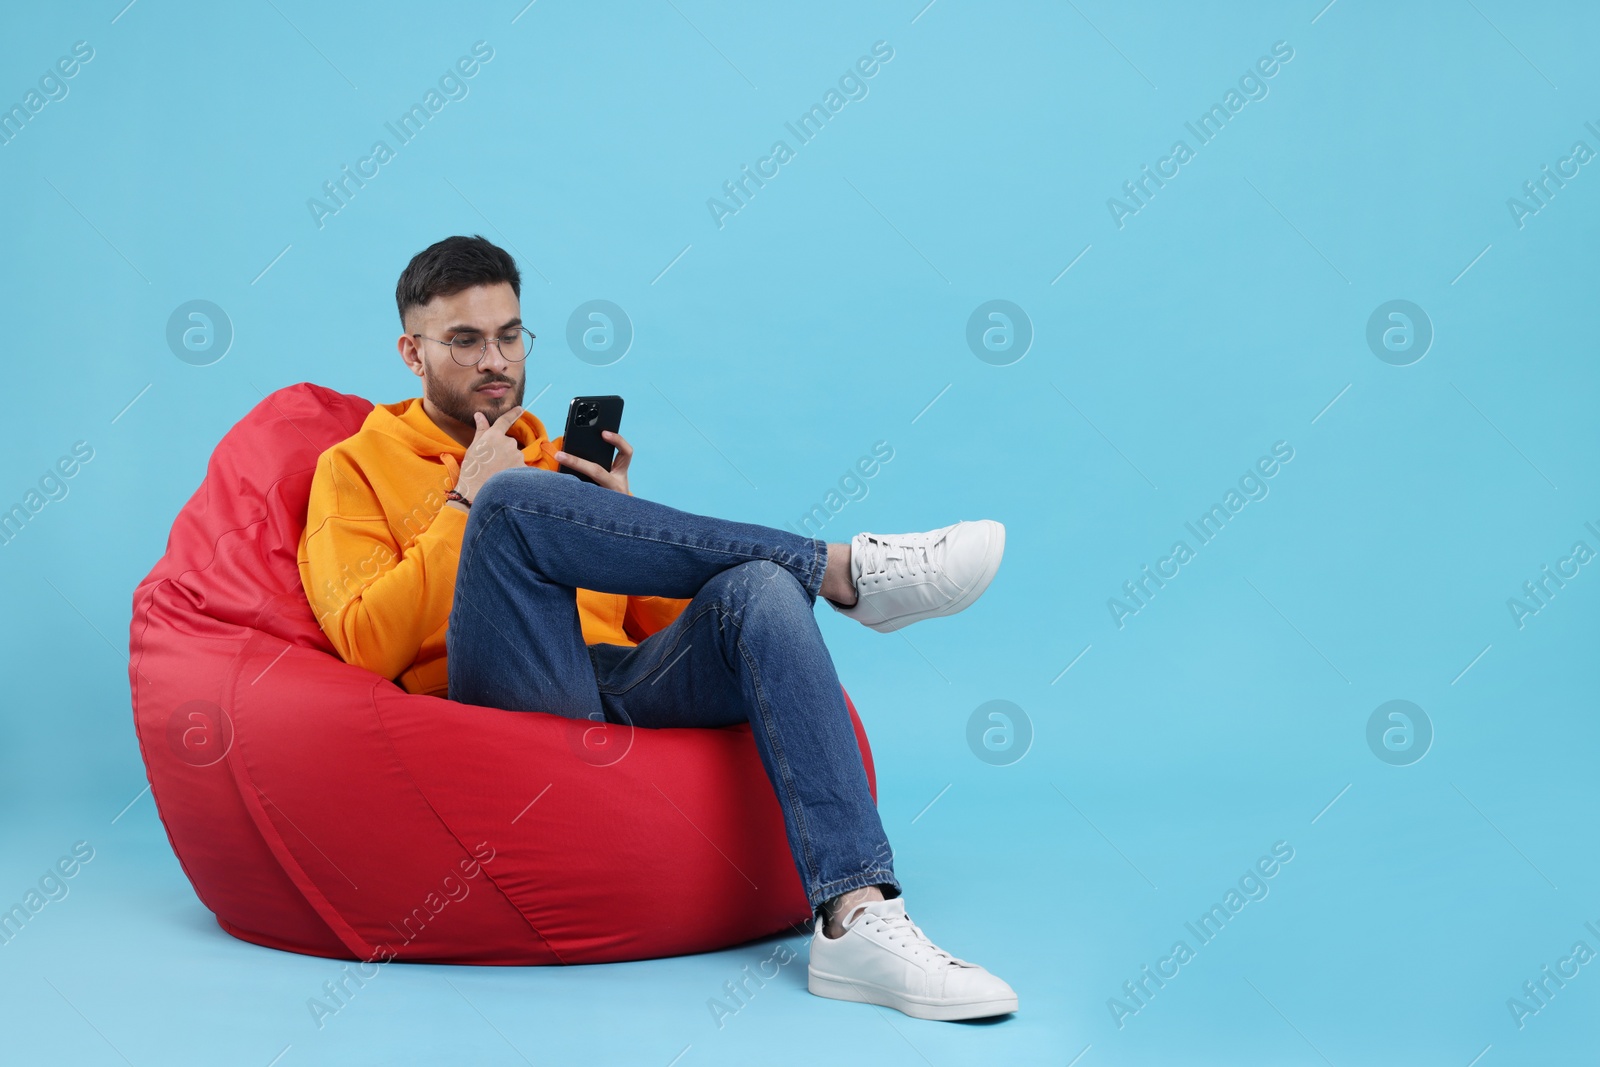 Photo of Handsome young man using smartphone on bean bag chair against light blue background. Space for text